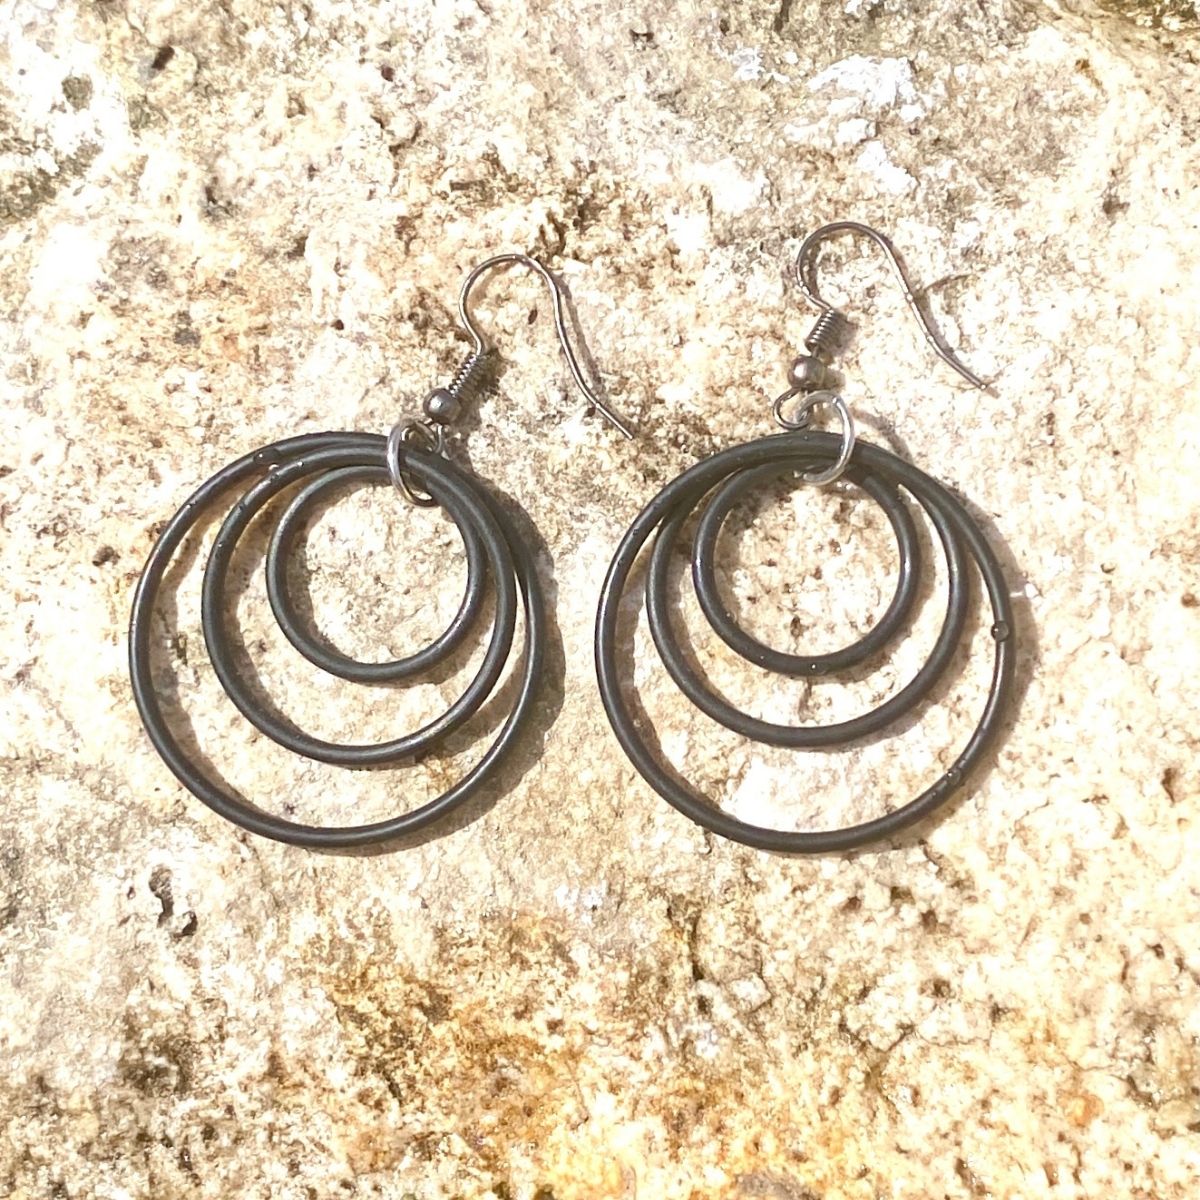 Zero Waste Eco Conscious Earrings with Up-recycled Scuba Gear O-rings